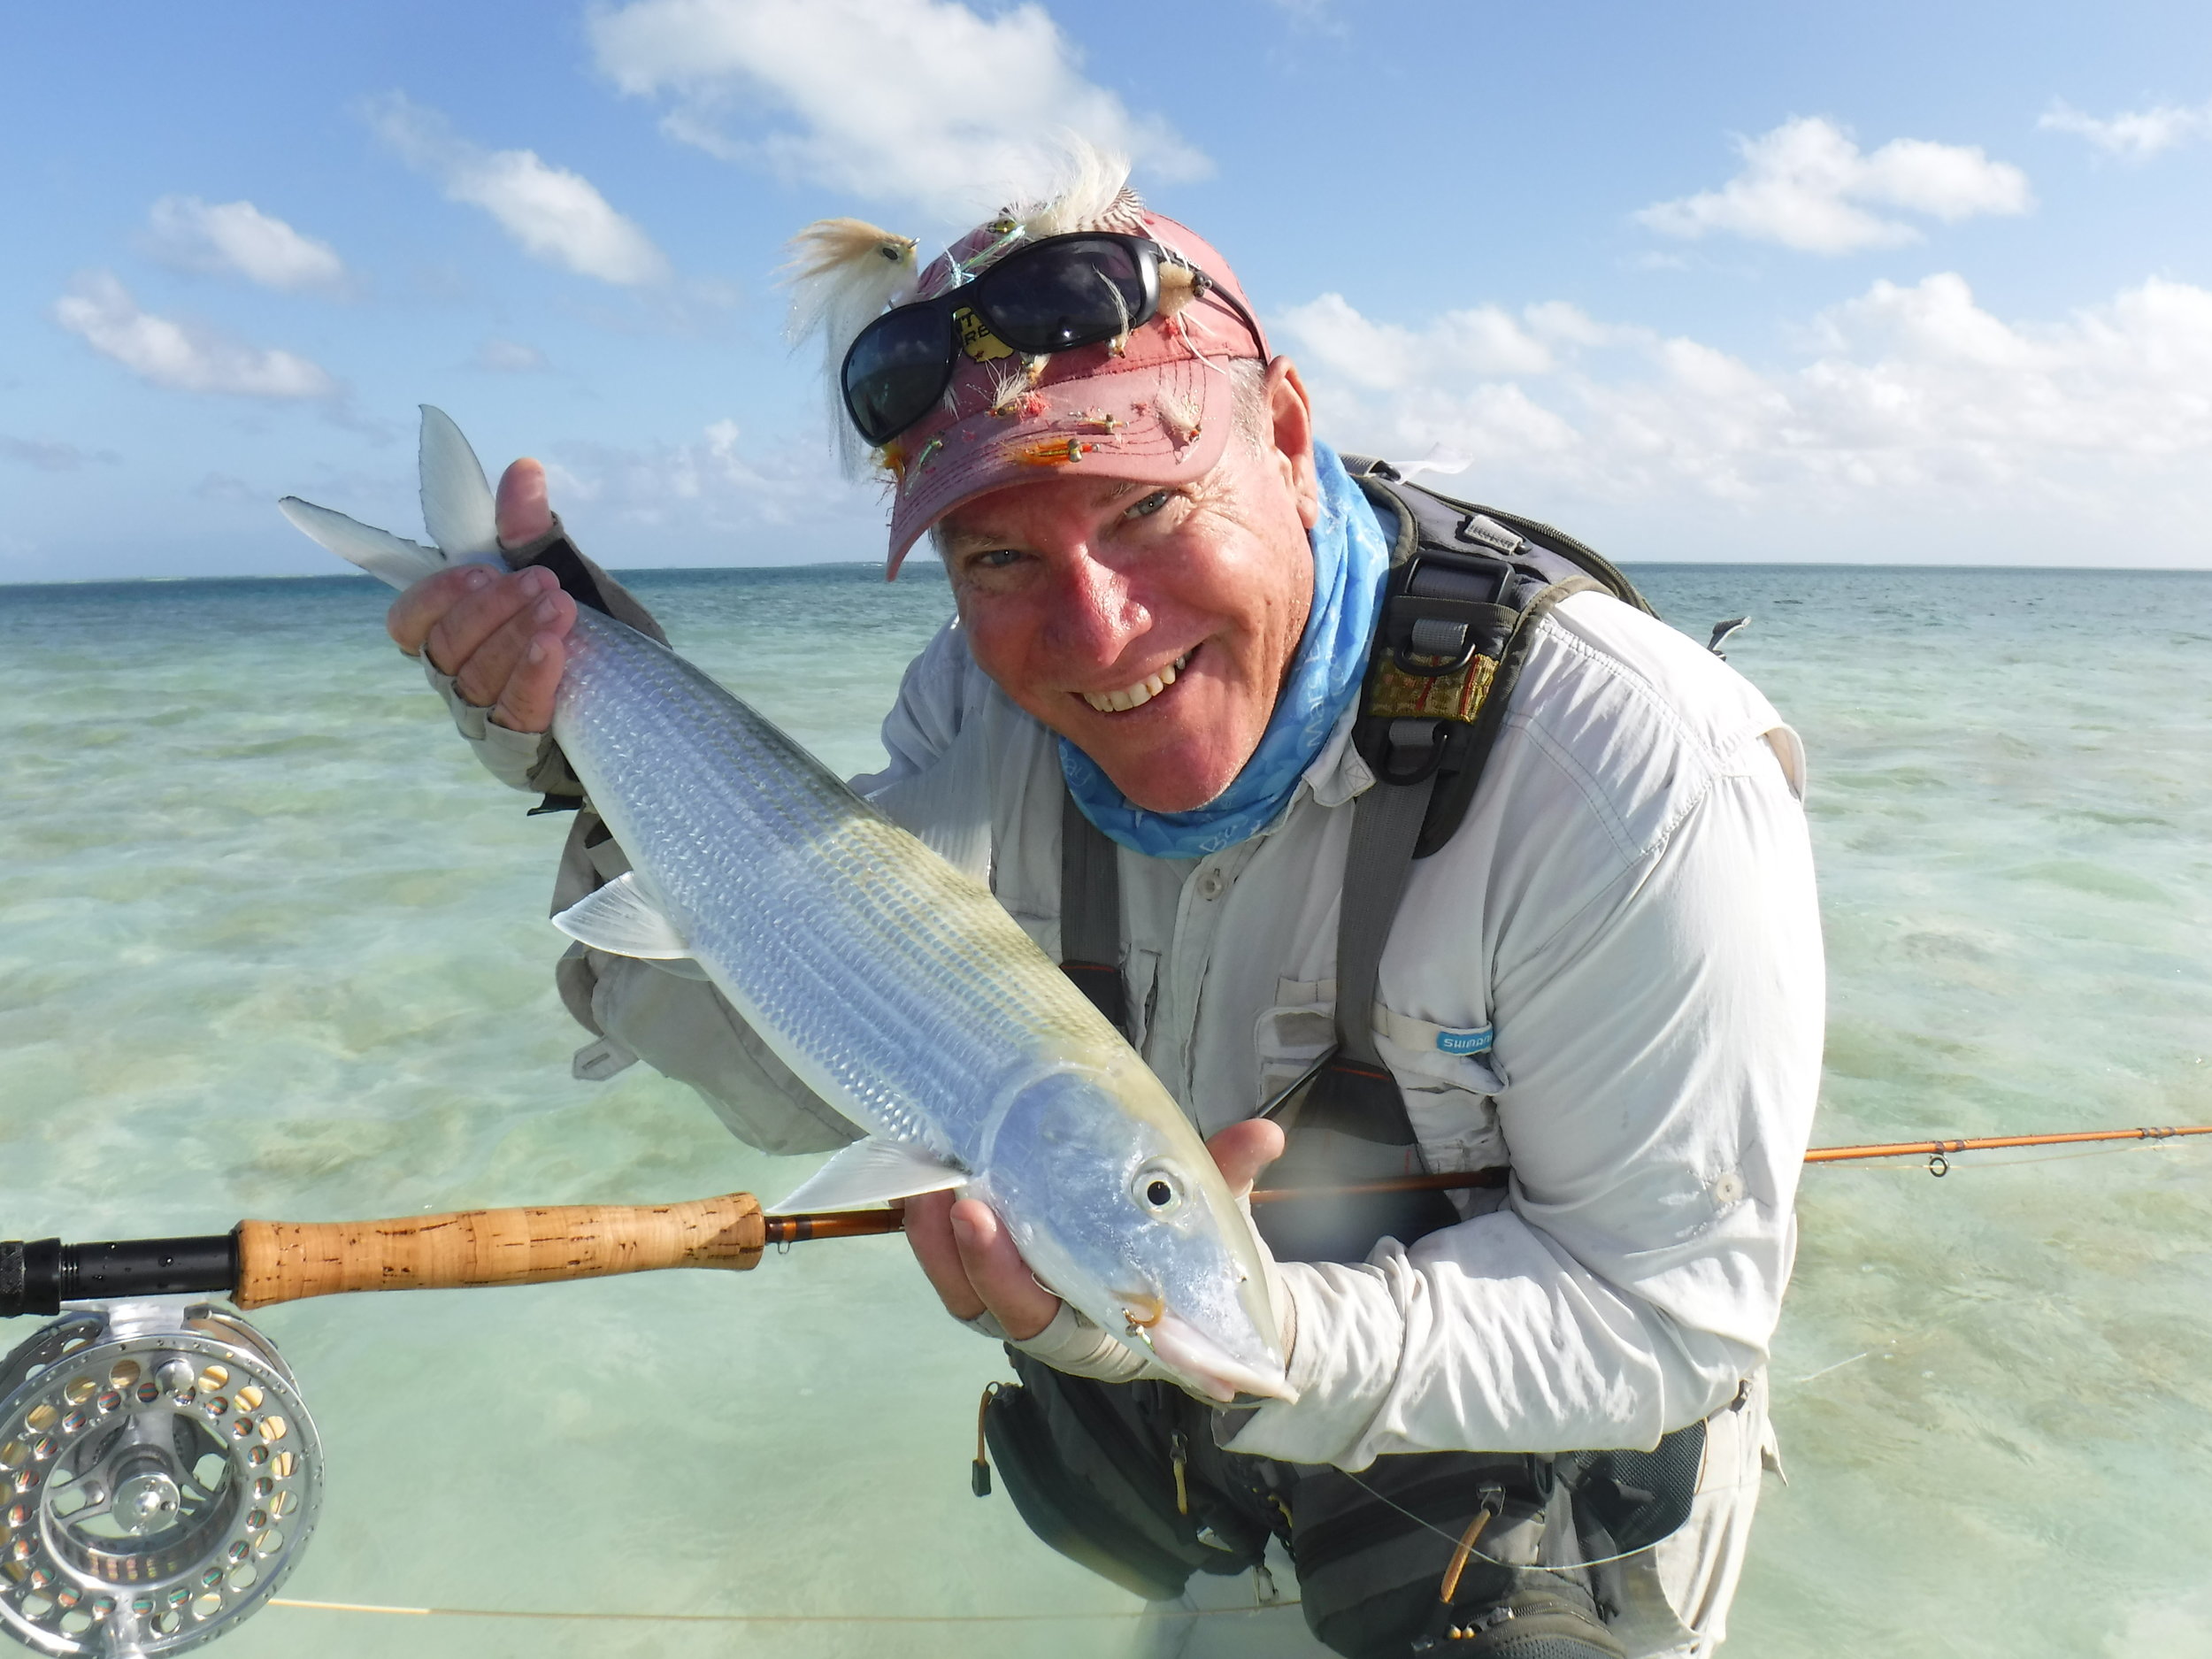 The fish it is all about. A Christmas Island Bonefish